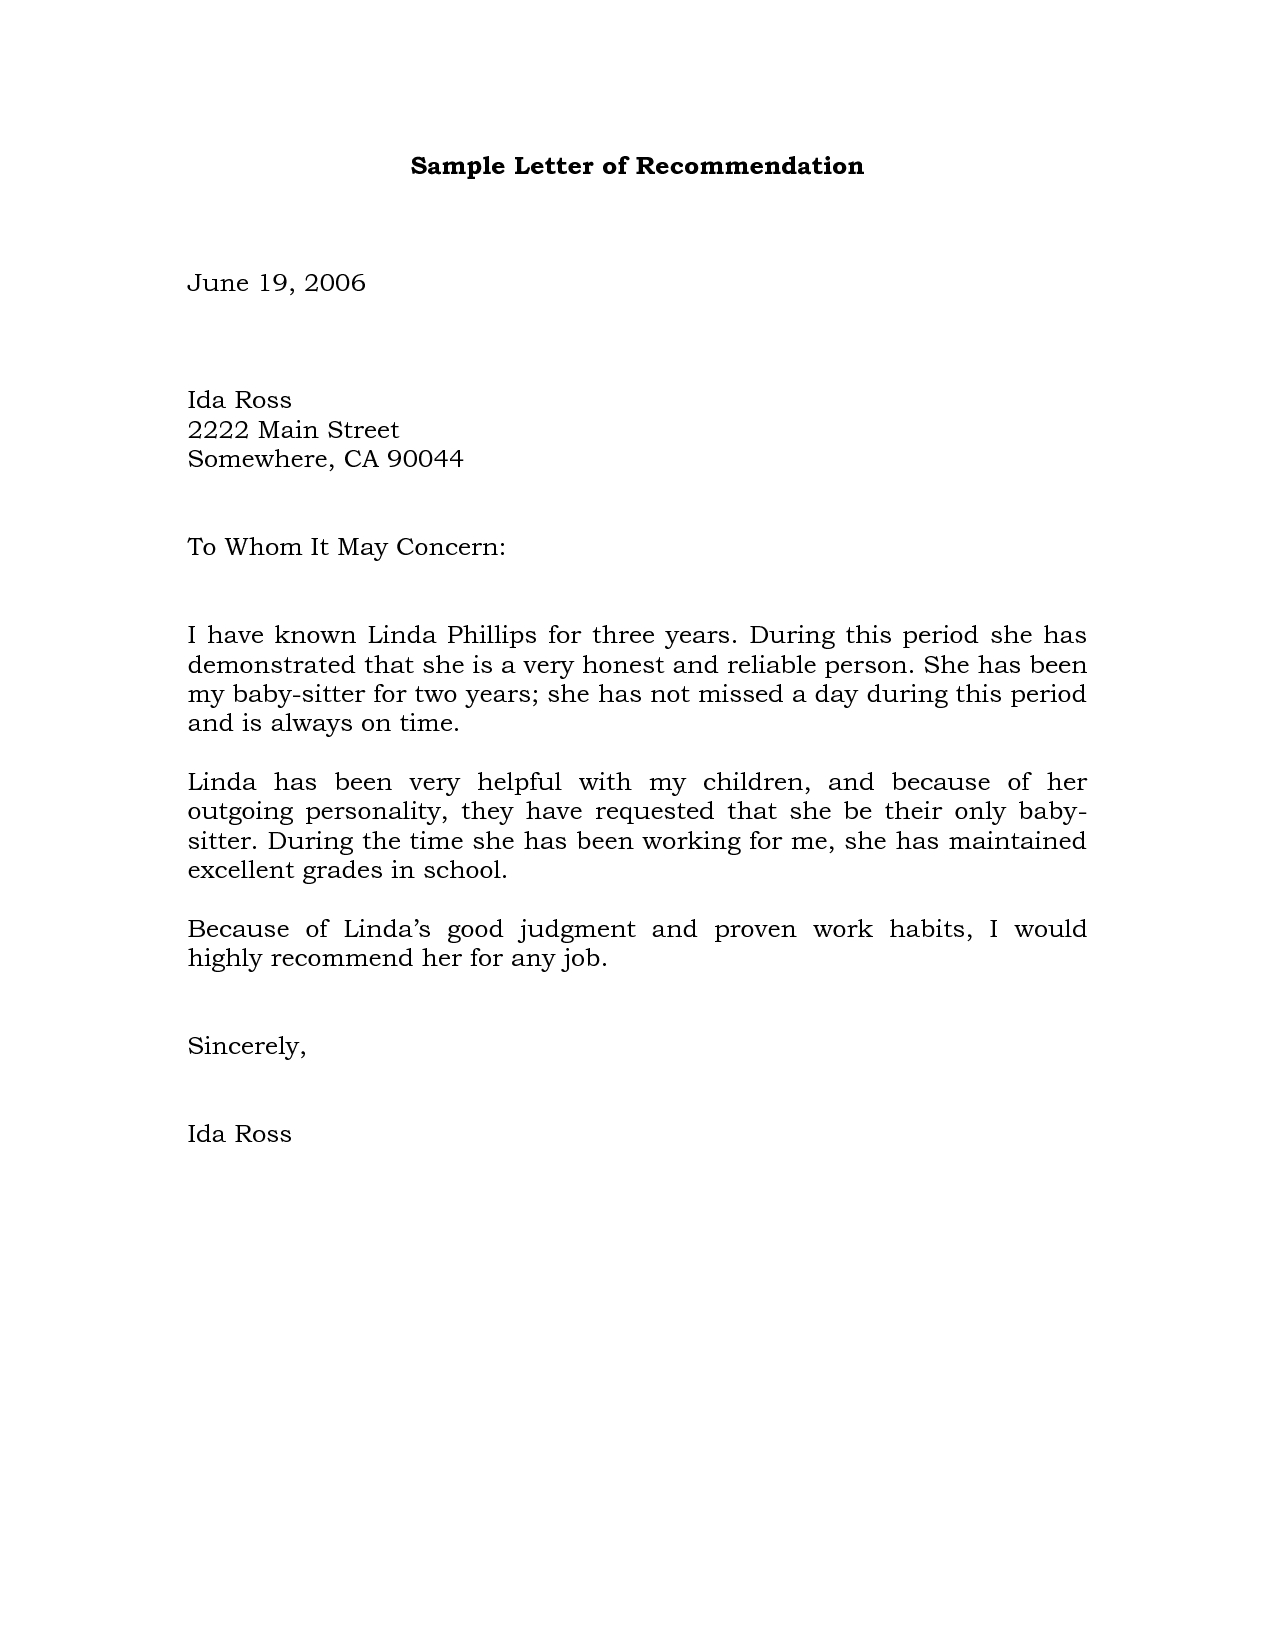 Free Reference Letter Template for Employment - Business Re Mendation Letter Template Acurnamedia